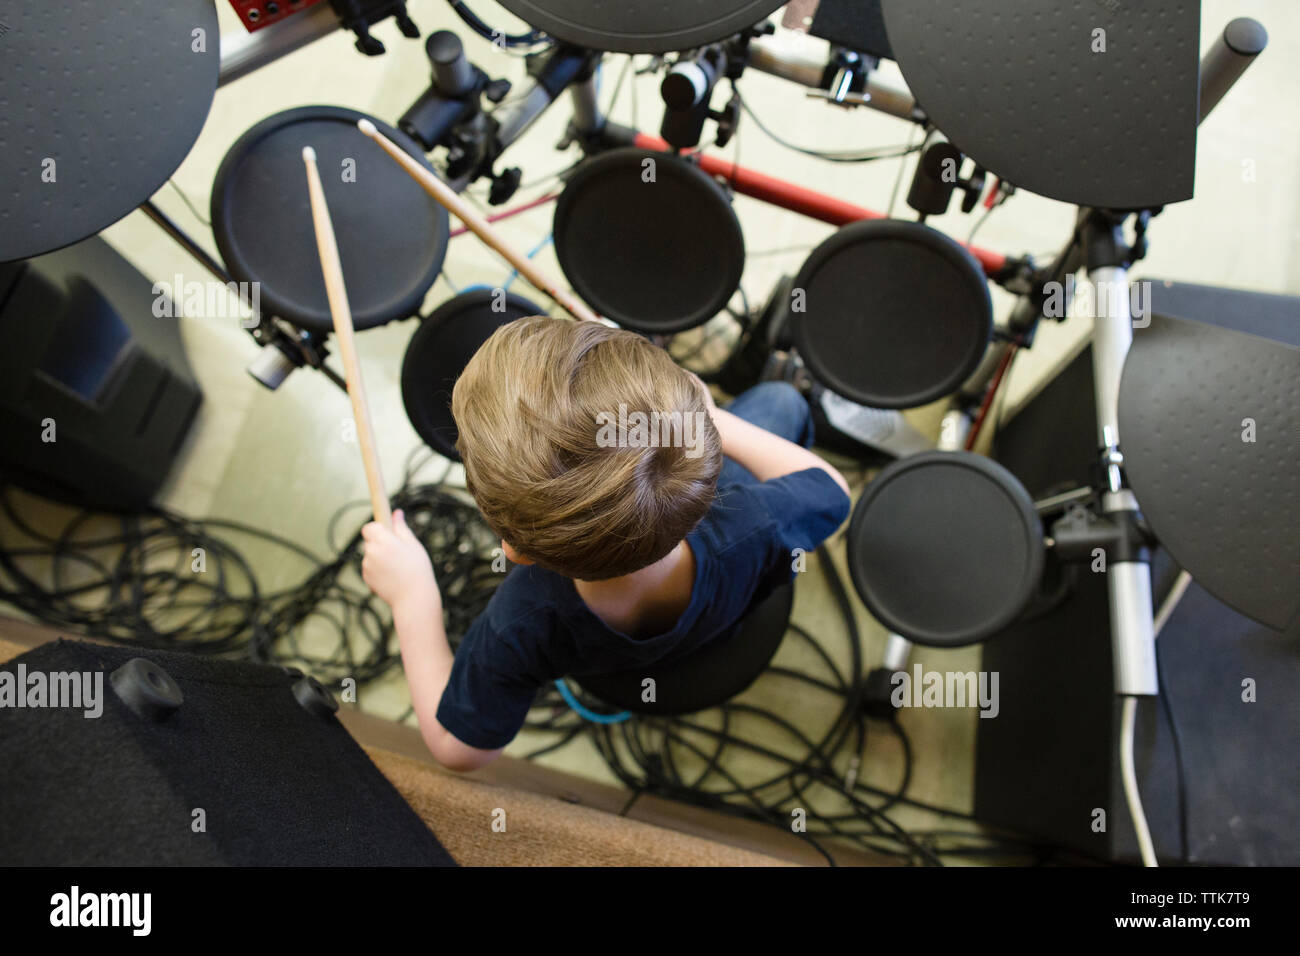 Overhead view of boy playing drum kit at Grace Baptist Church Stock Photo